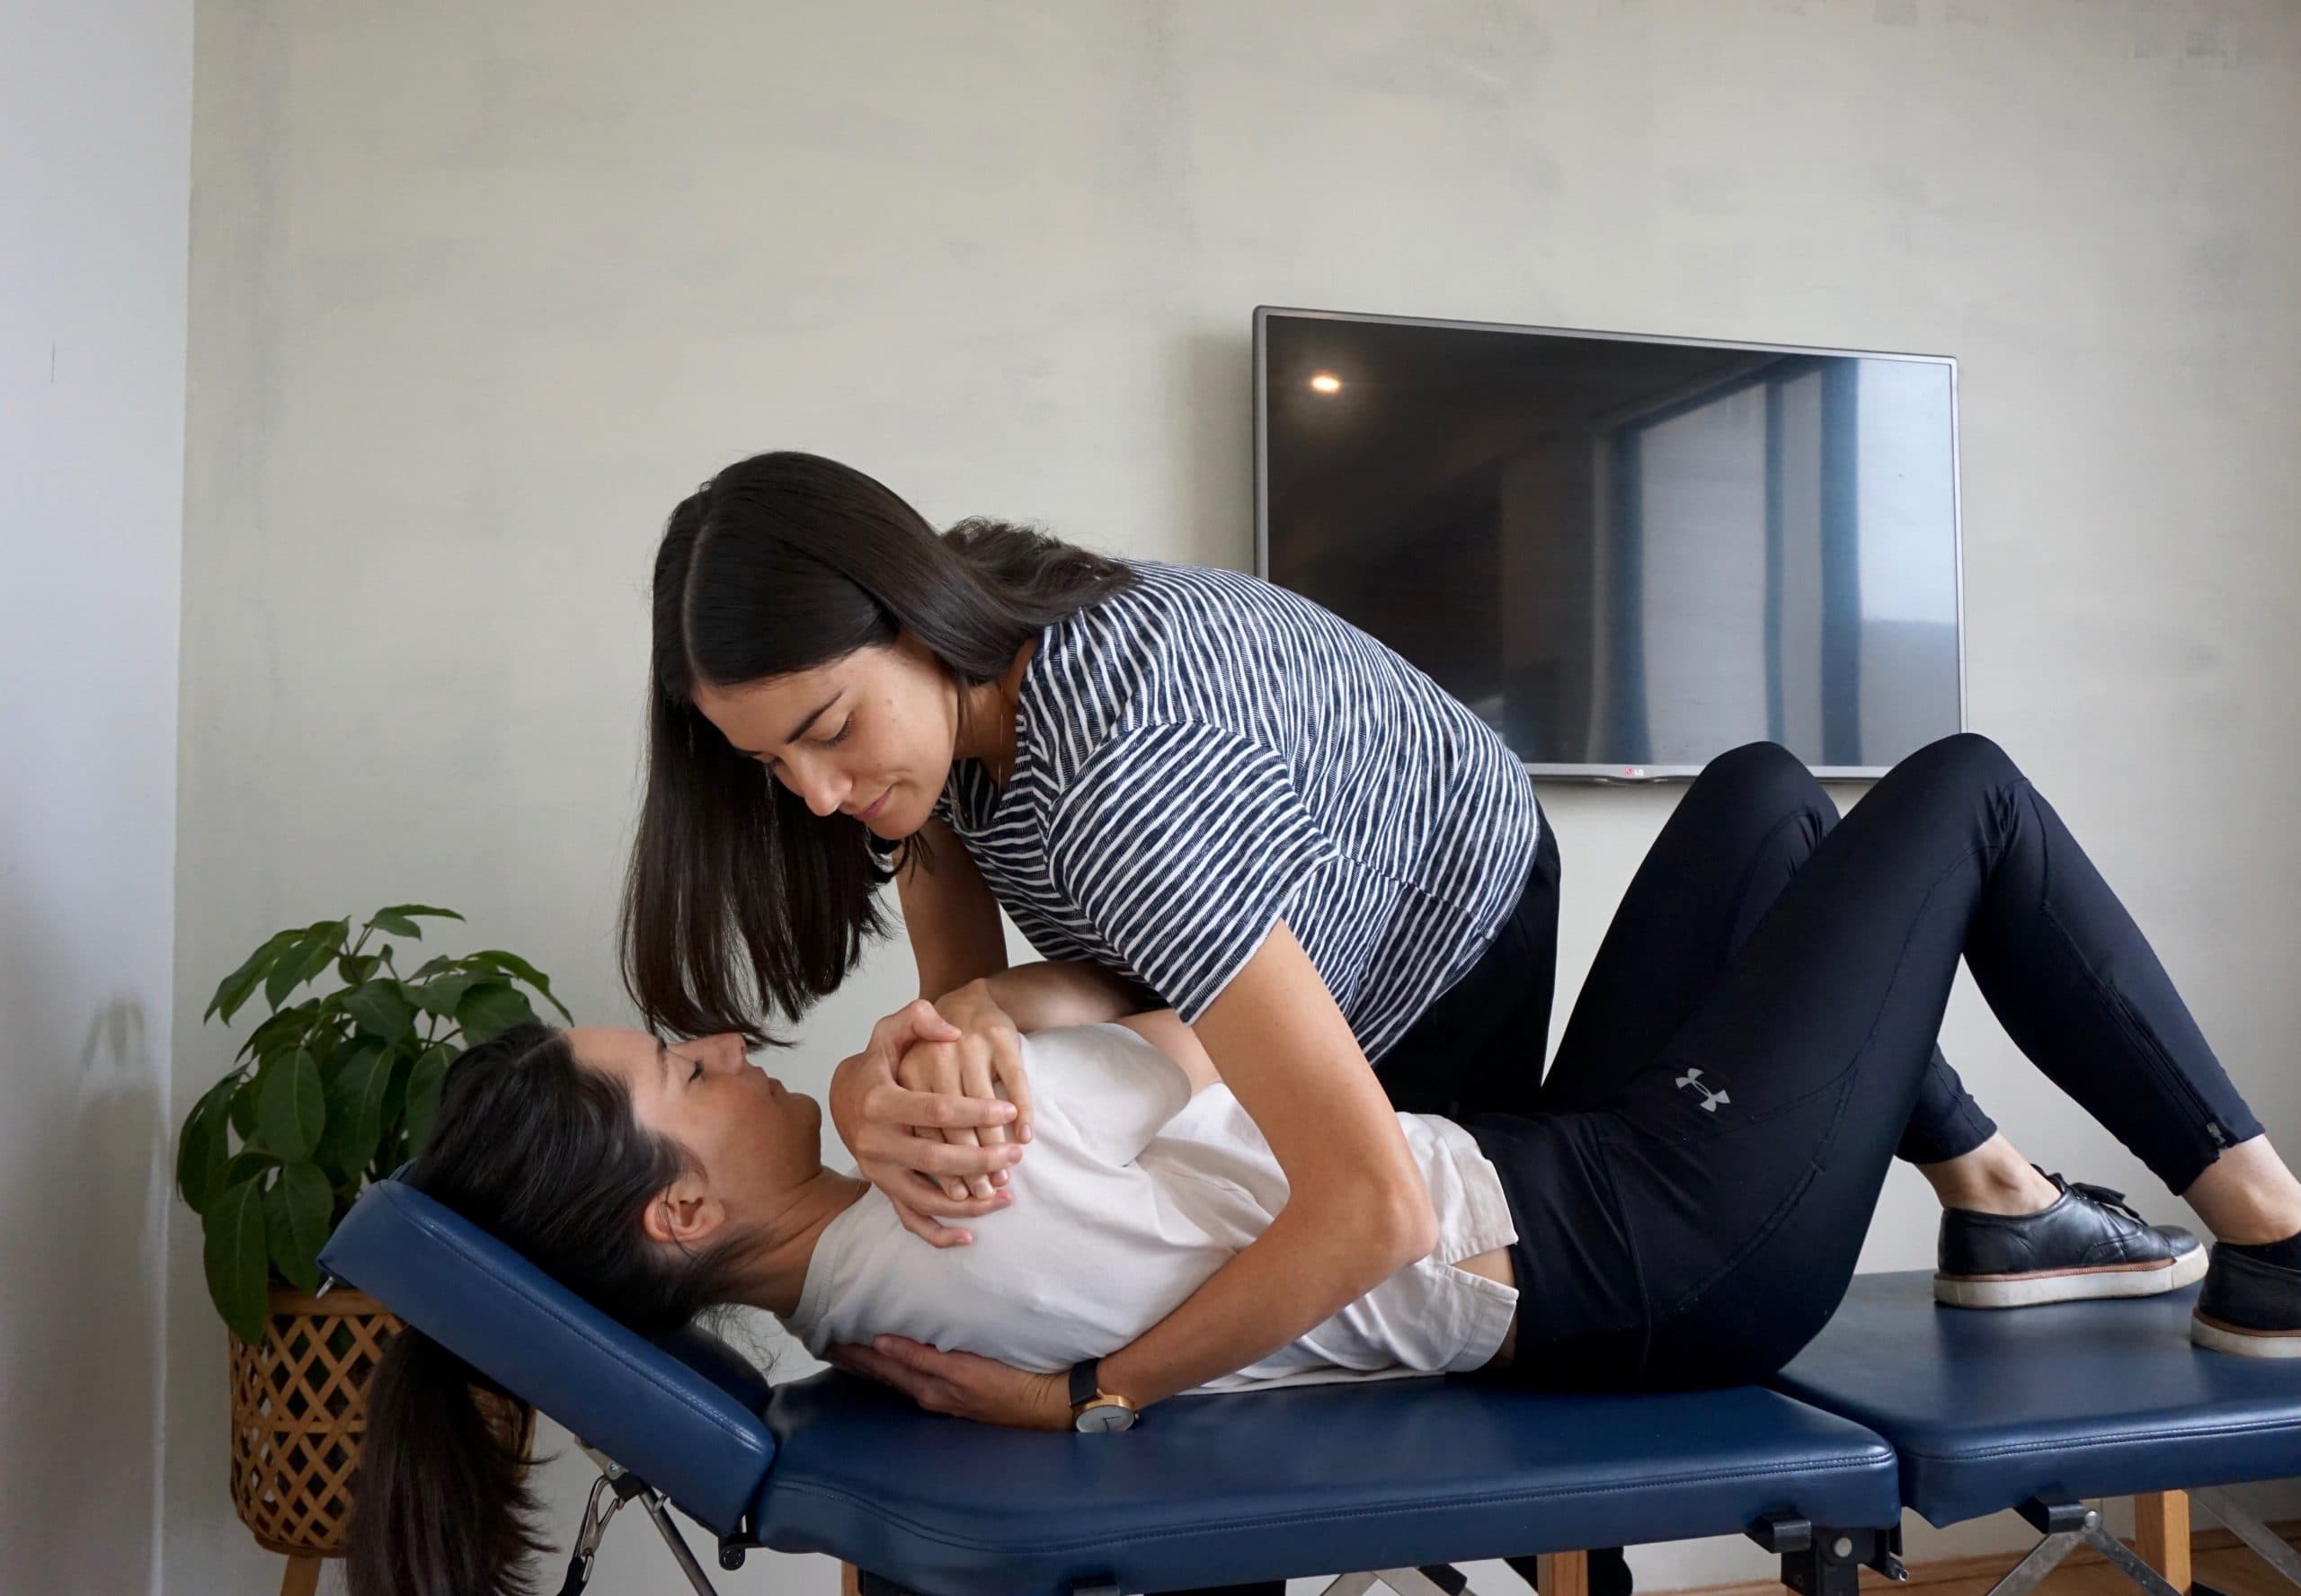 Dr. Nicole (Chiropractor) performing an Upper Back Manipulation